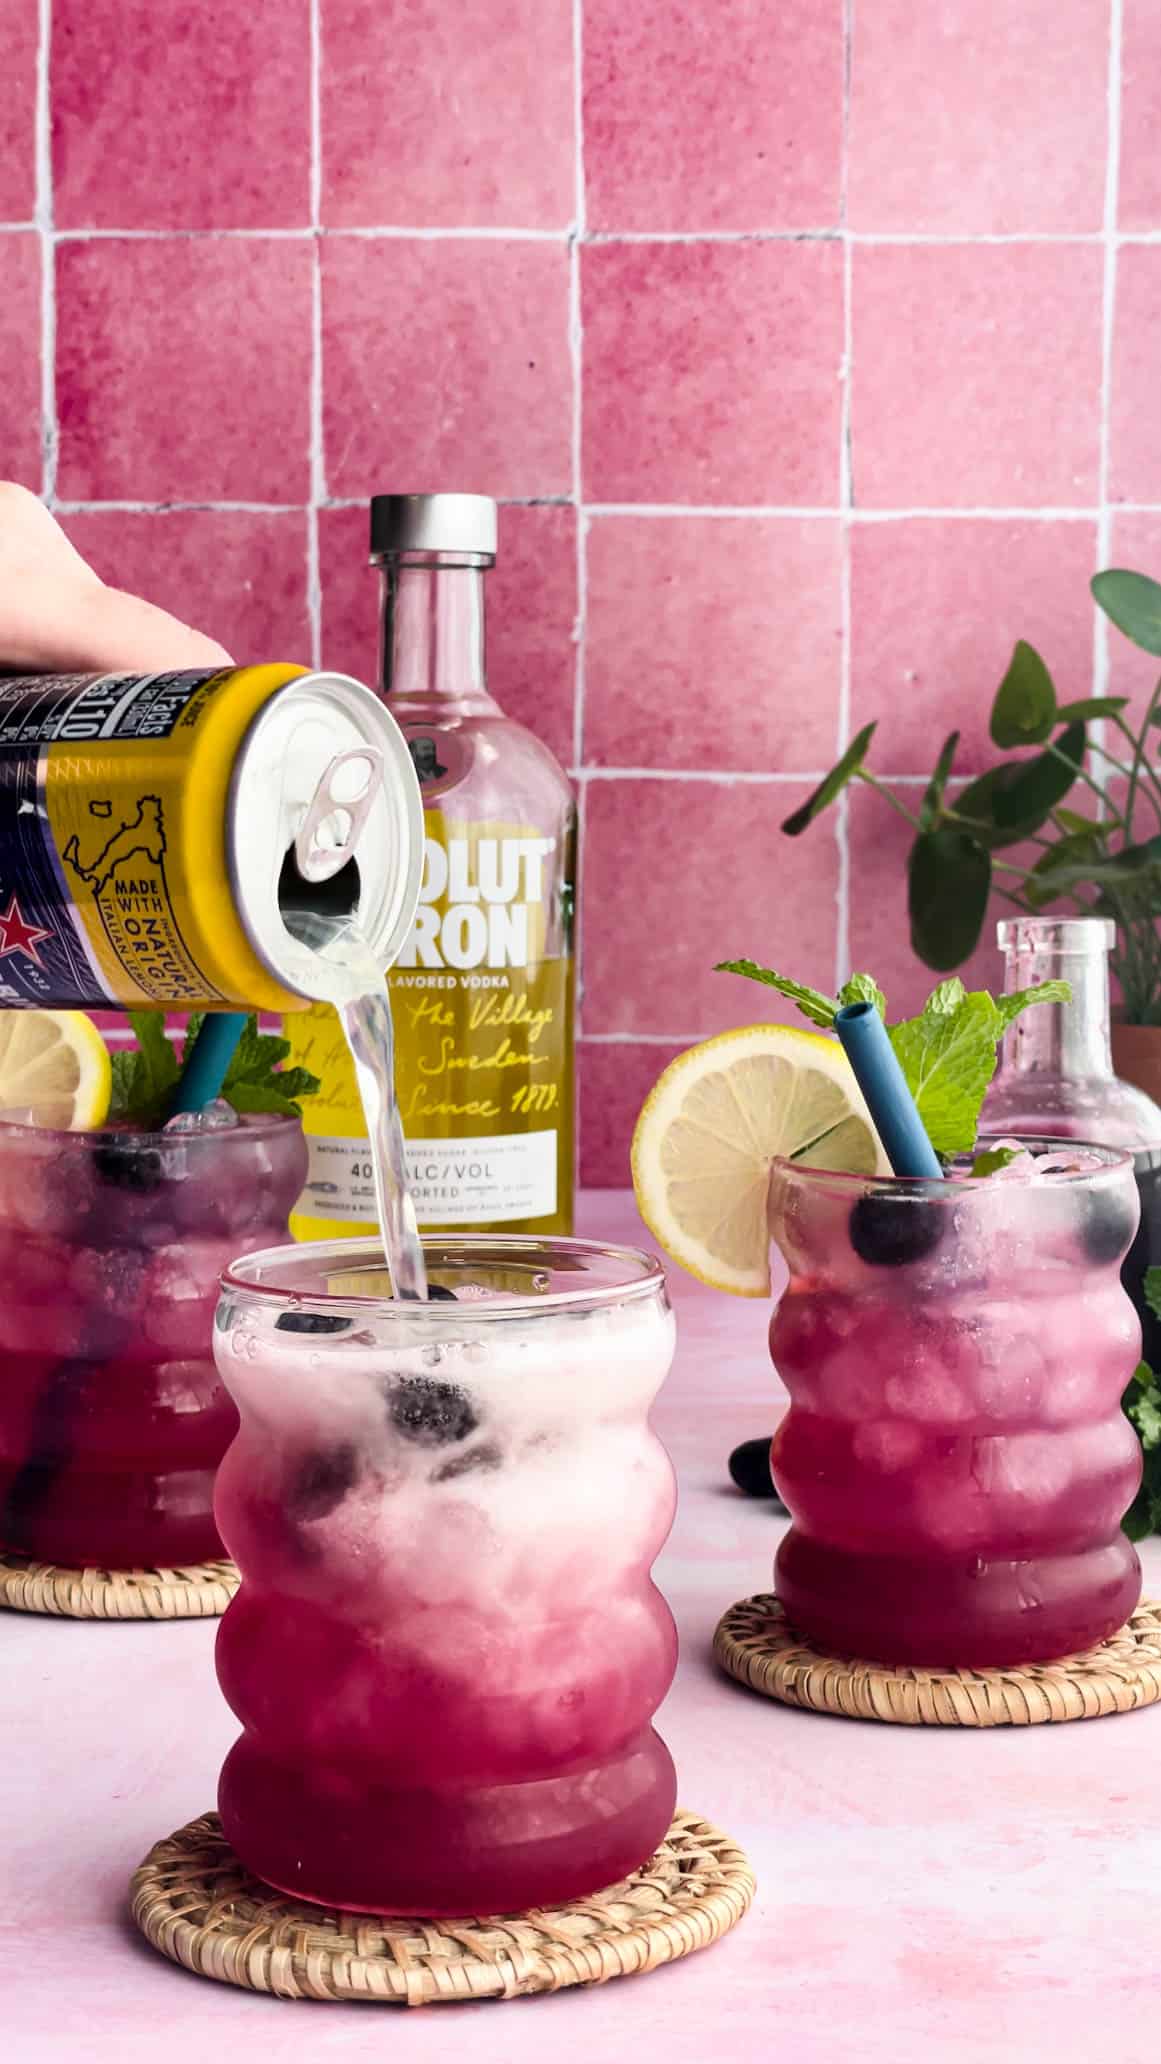 A hand from out of frame is pouring sparking lemon water into a cocktail glass to top off a sparkling blueberry vodka lemonade cocktail.